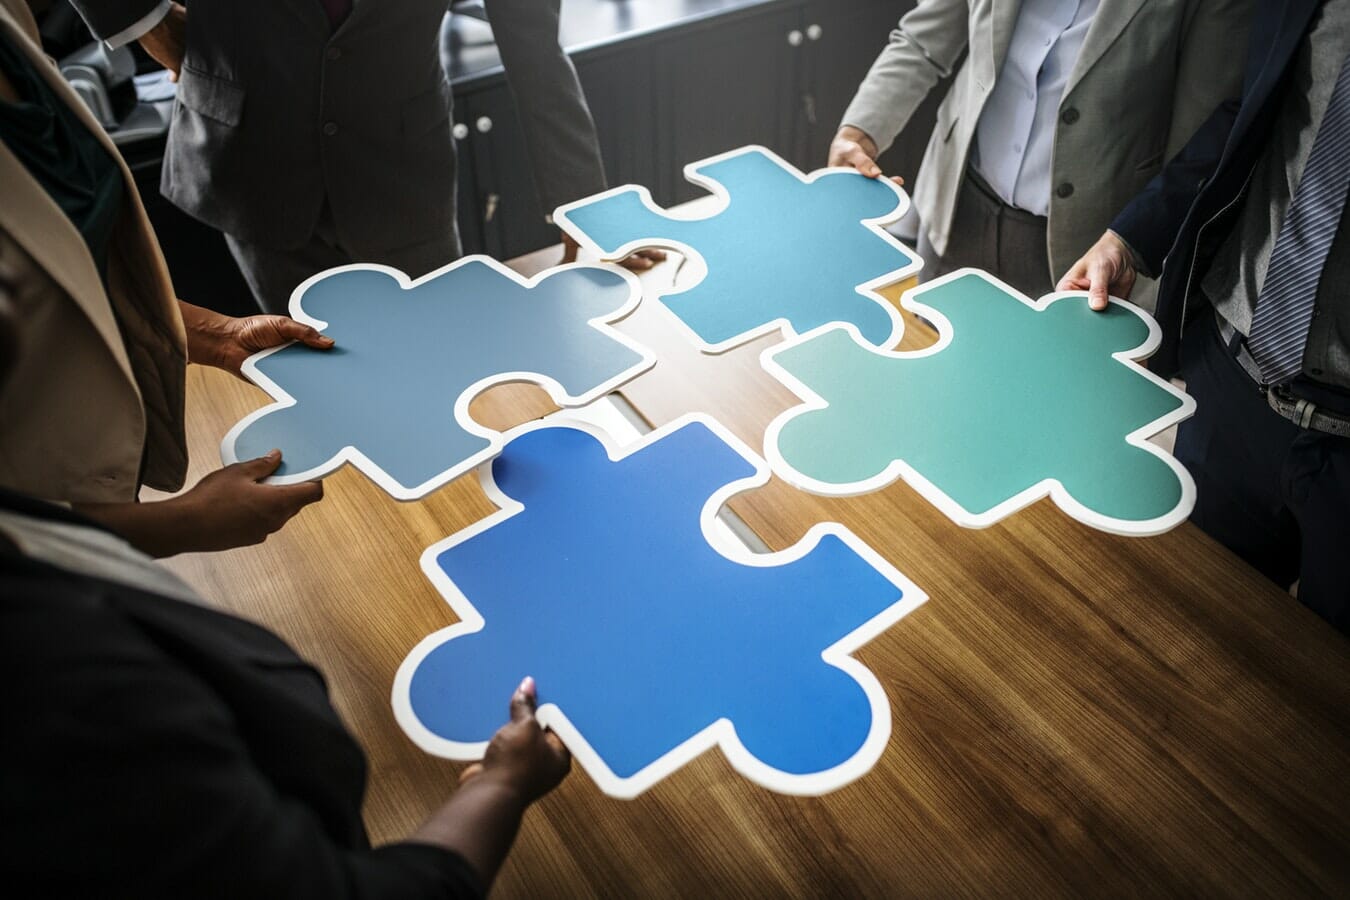 A group of business people holding jigsaw puzzle pieces, discussing IR35.